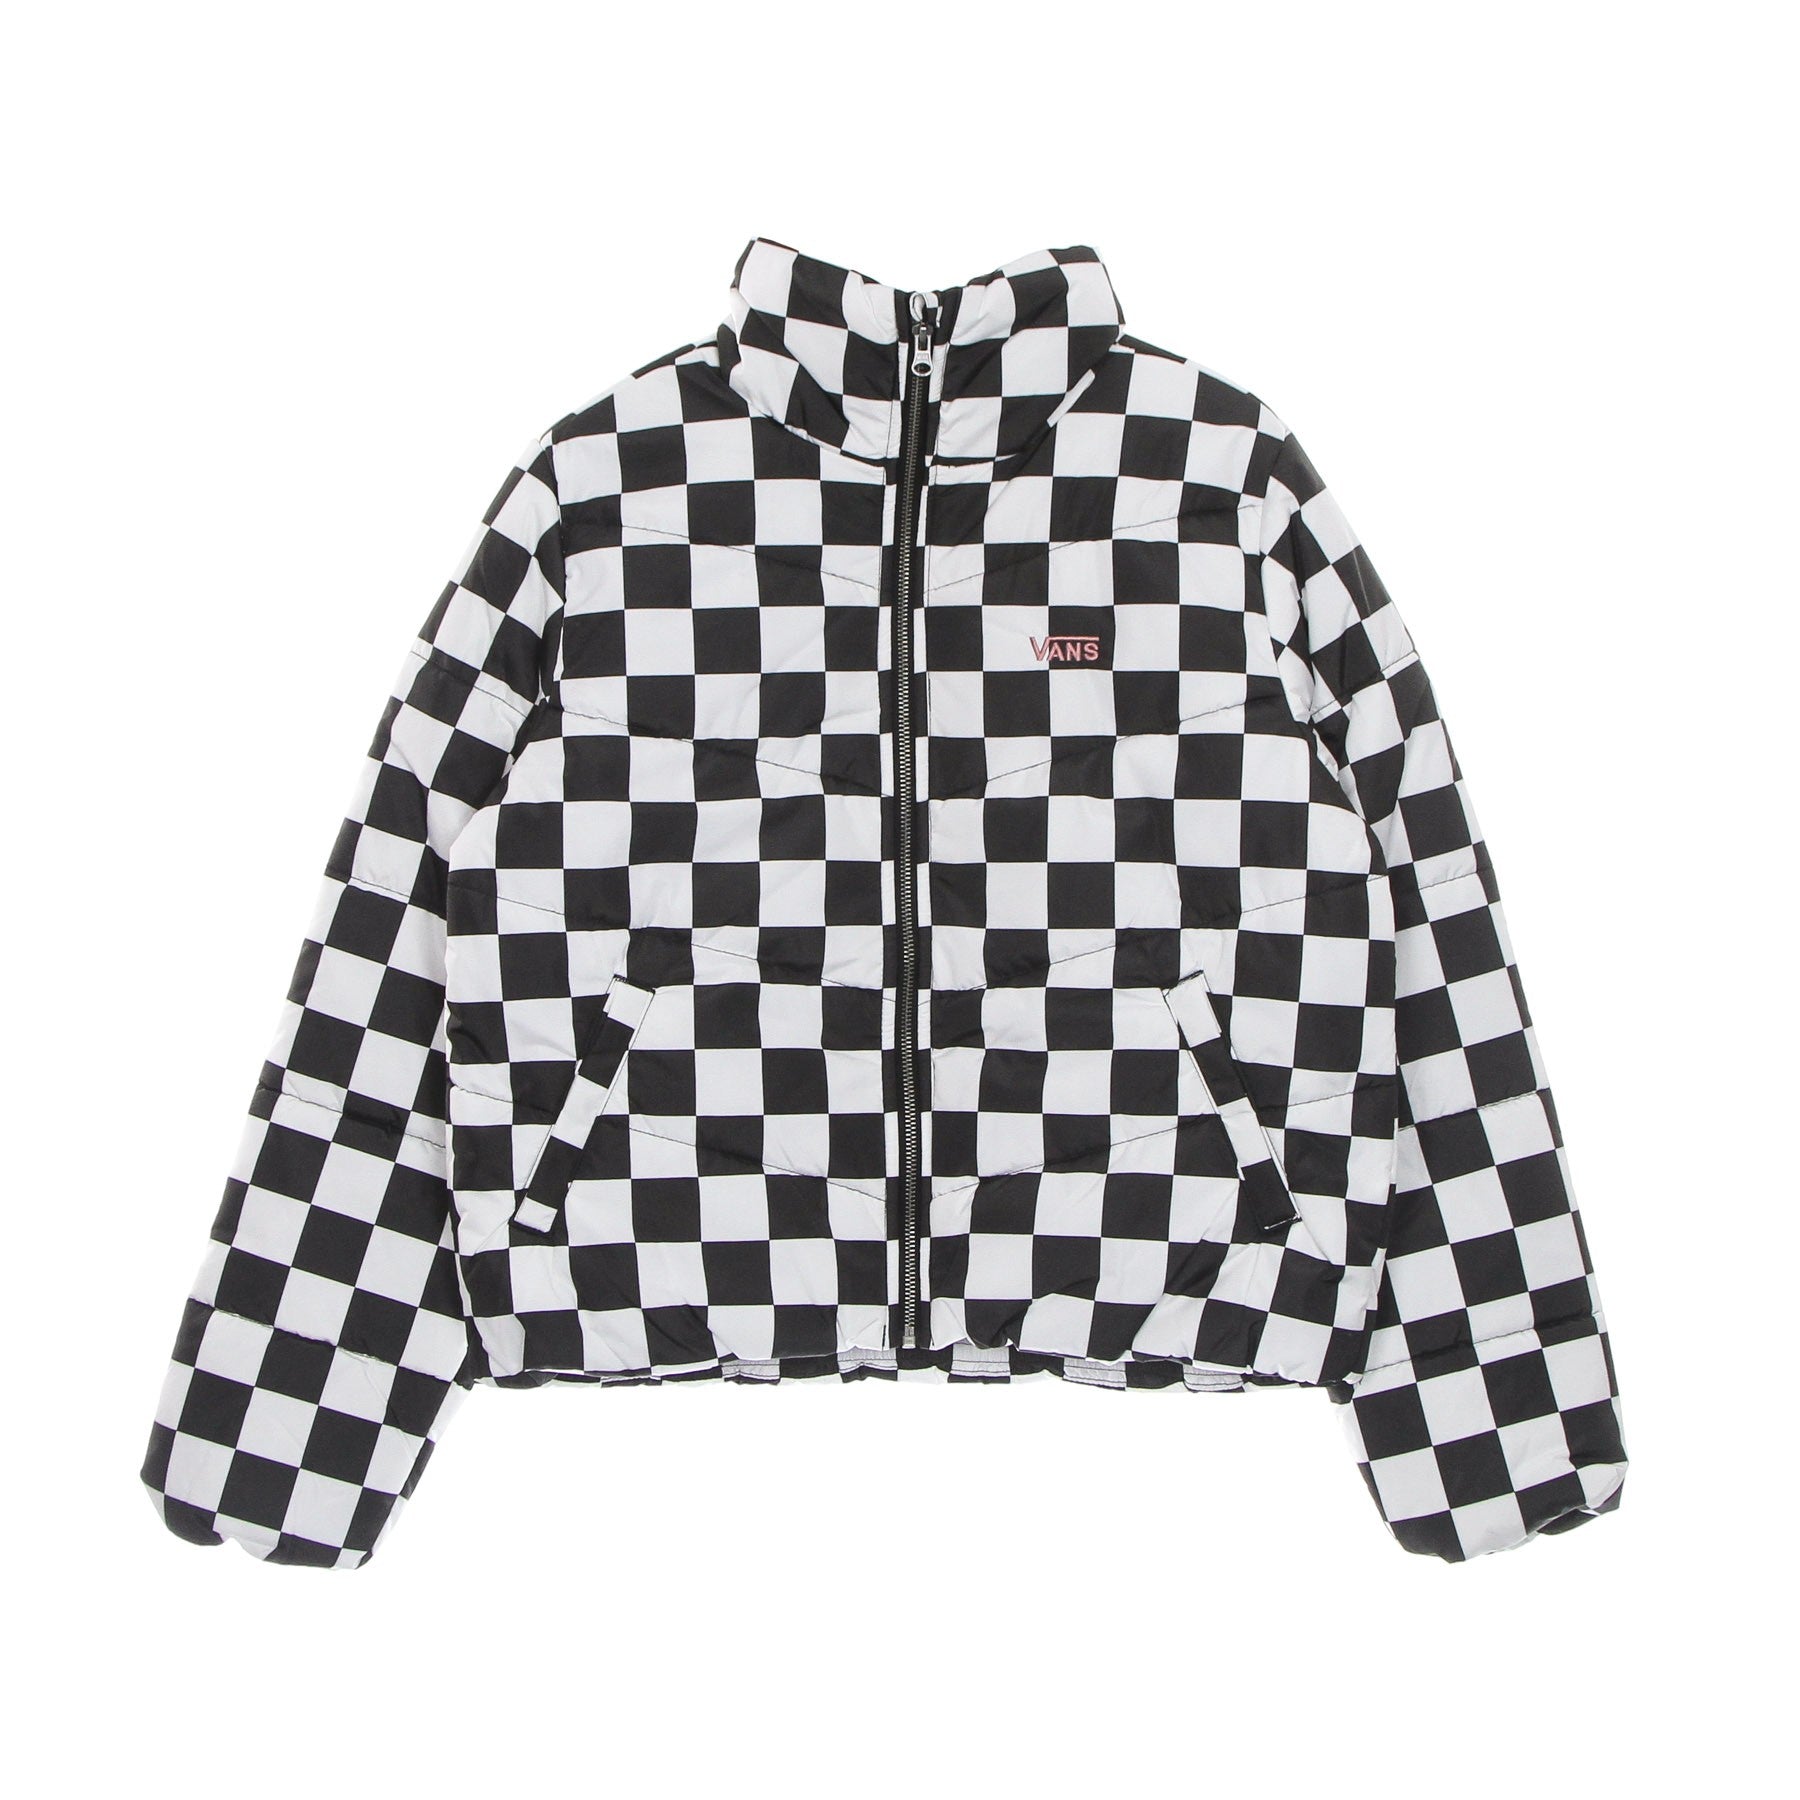 Foundry V Printed Checkerboard Women's Down Jacket